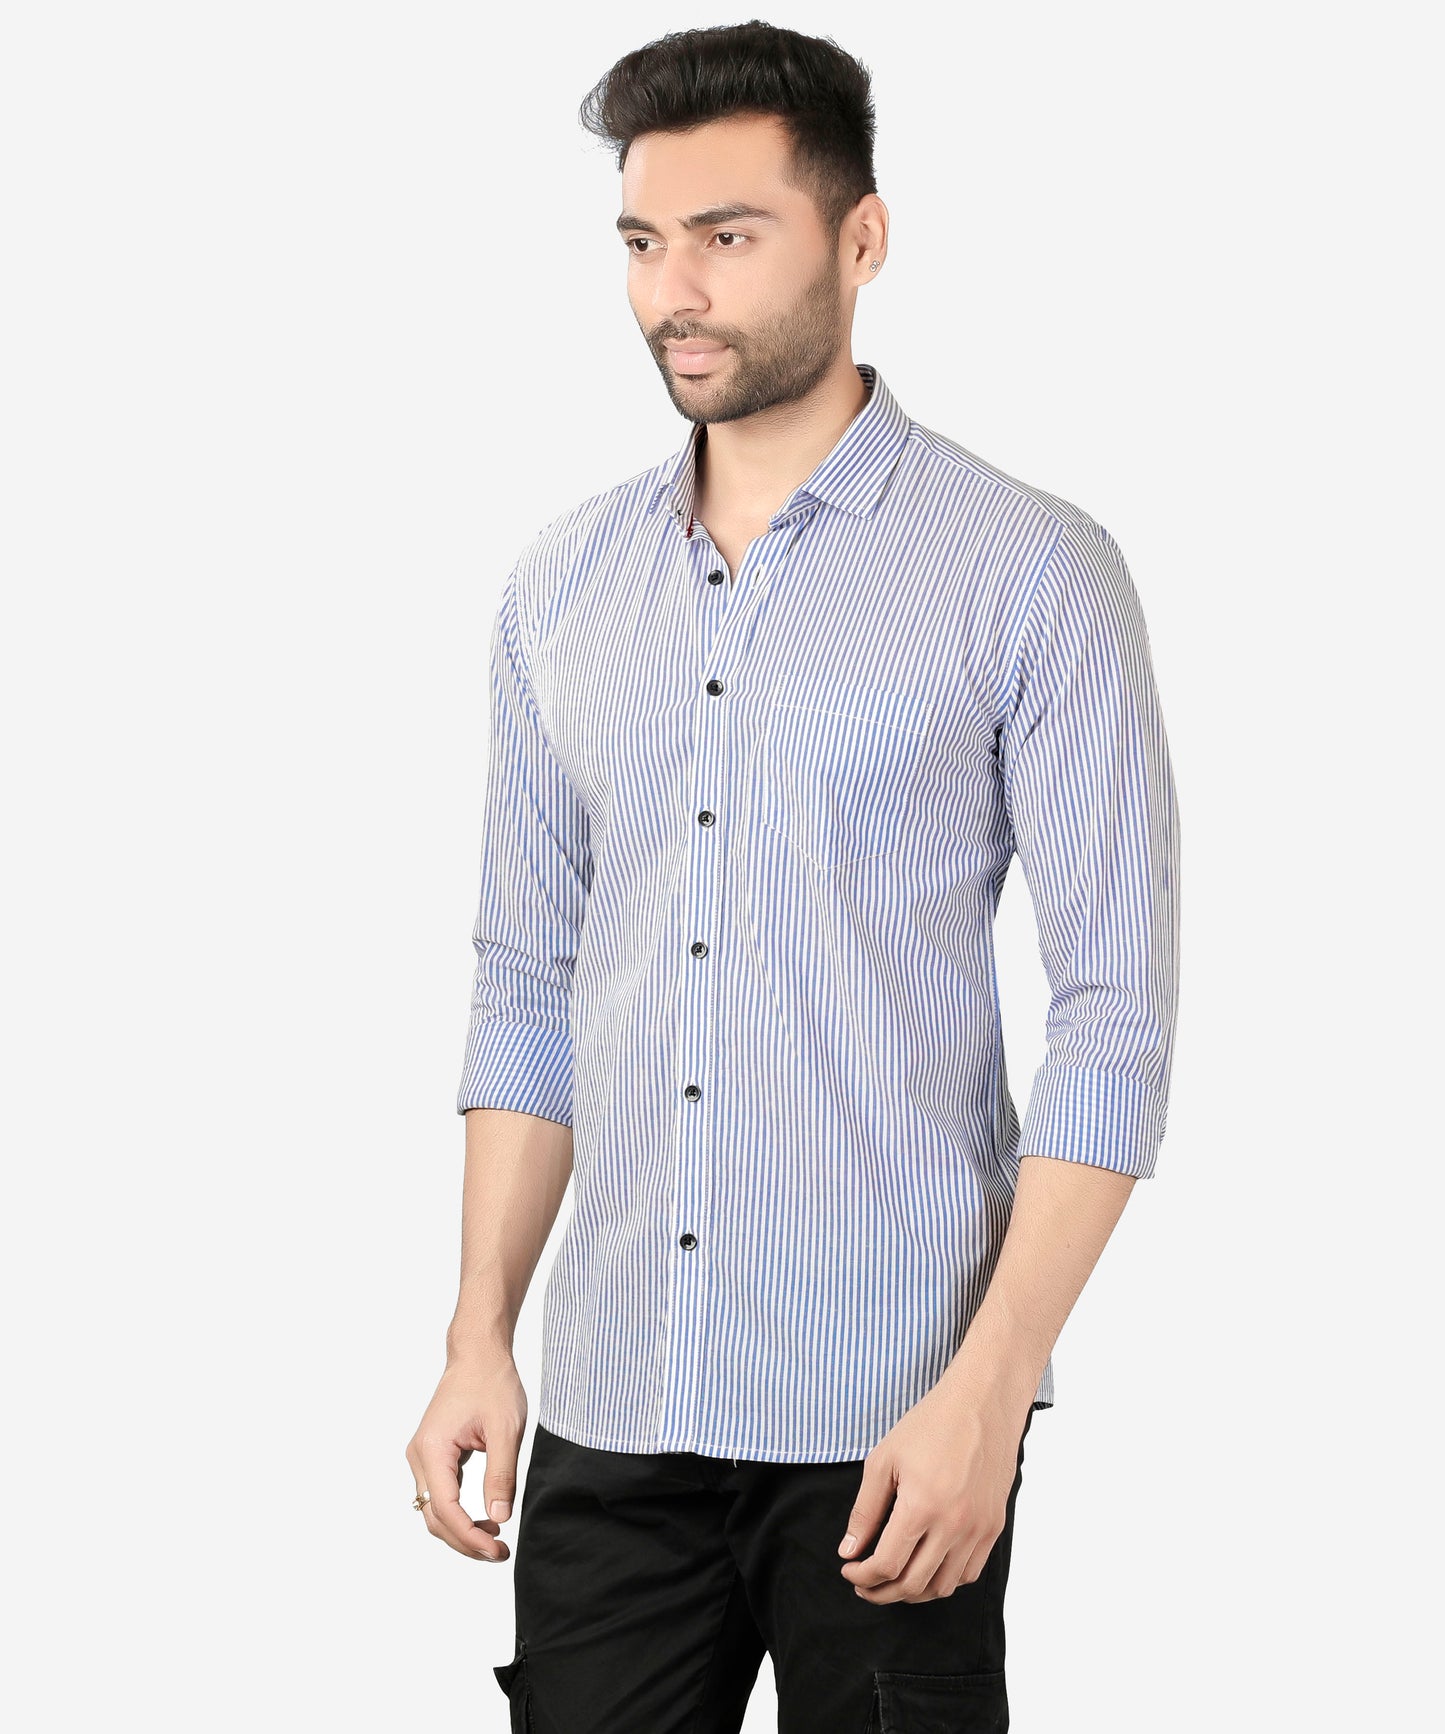 5thanfold Men's Casual Pure Cotton Full Sleeve Striped Sky Blue Slim Fit Shirt